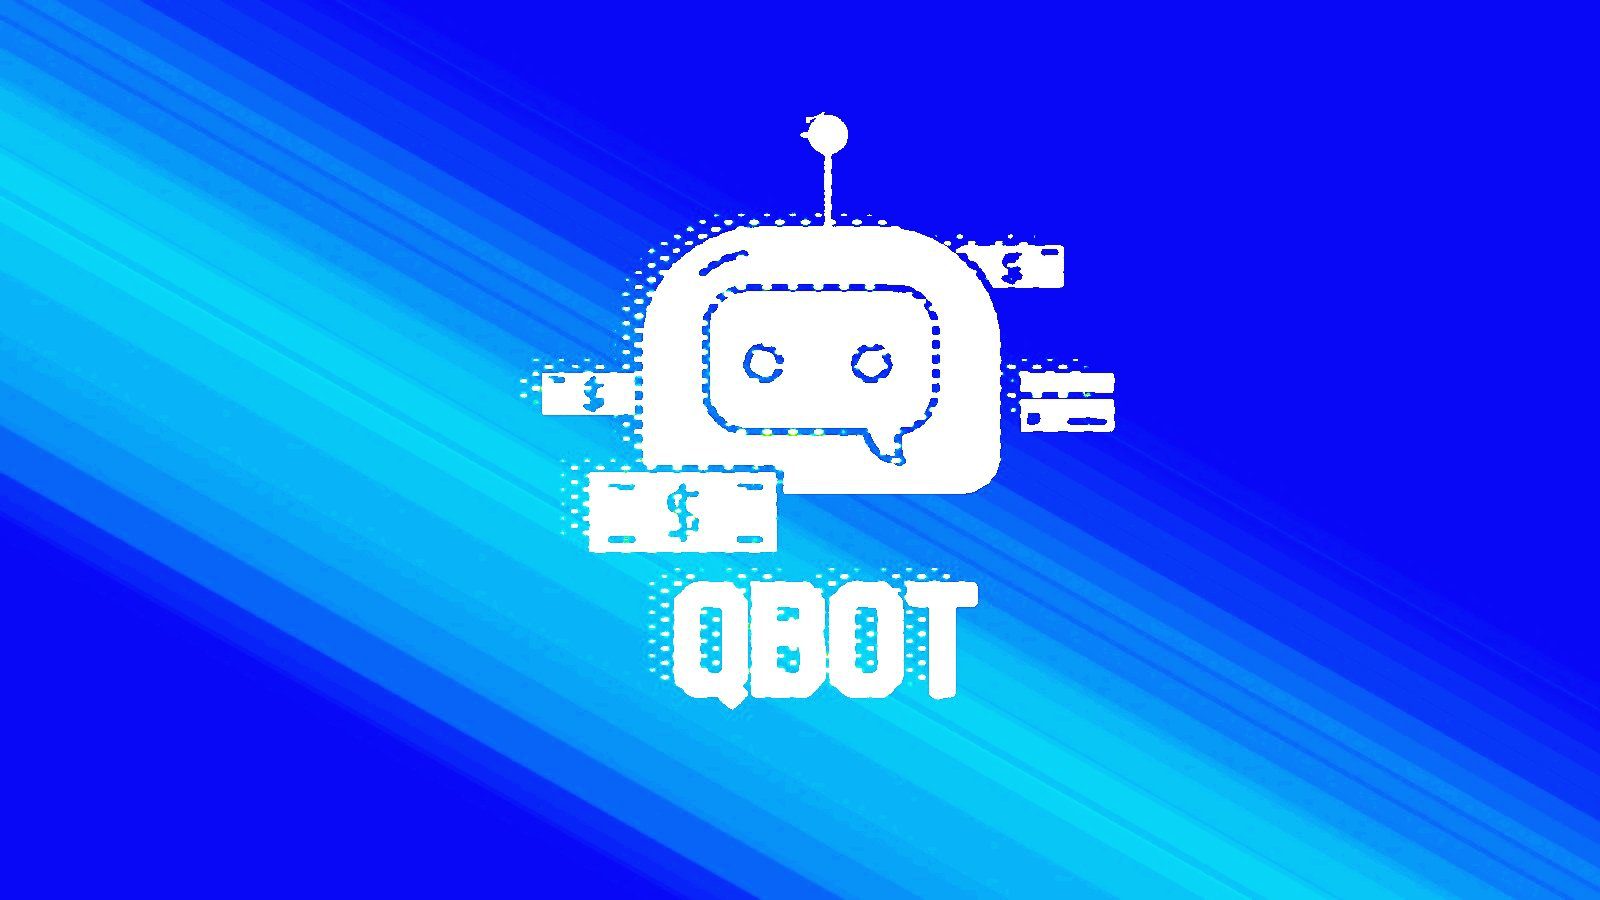 qbot-malware-abuses-windows-wordpad-exe-to-infect-devices-–-source:-wwwbleepingcomputer.com